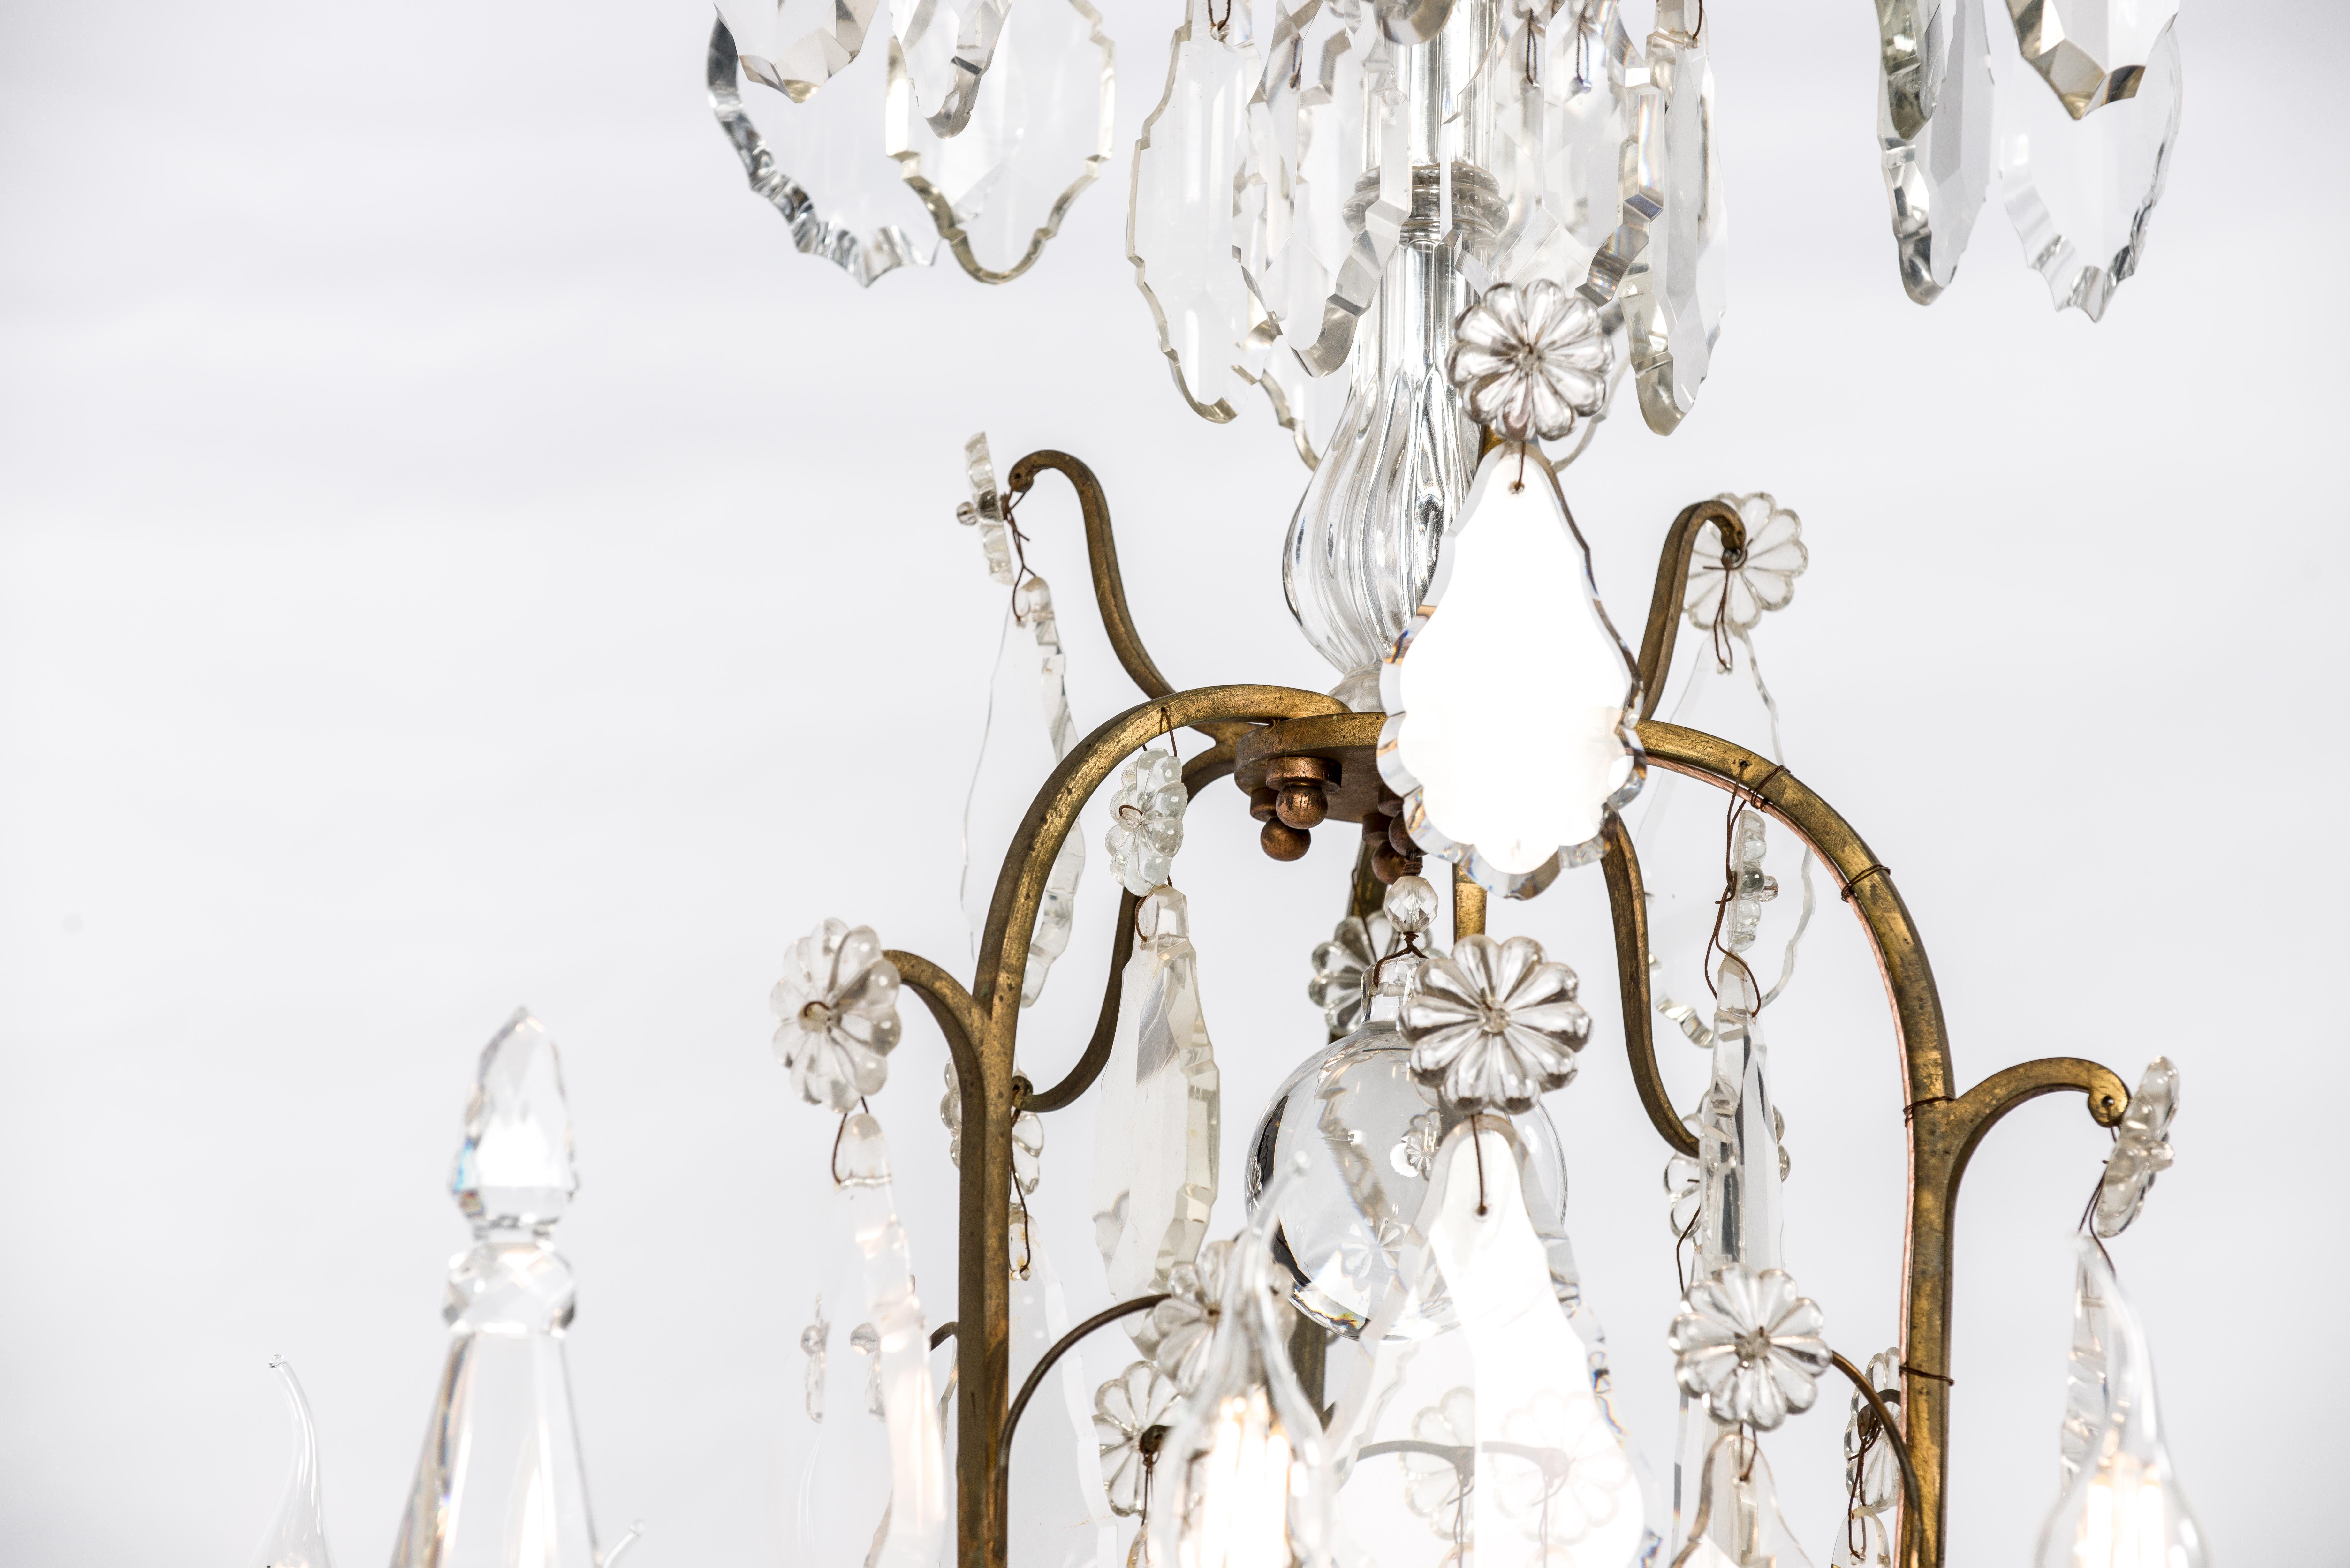 This beautiful chandelier was made in Southern France around 1850. It has a forged brass fire gilt open cage frame and is hung with the highest quality clear crystal cut ornaments. The crystal ornaments are thick, large, and were beautifully cut